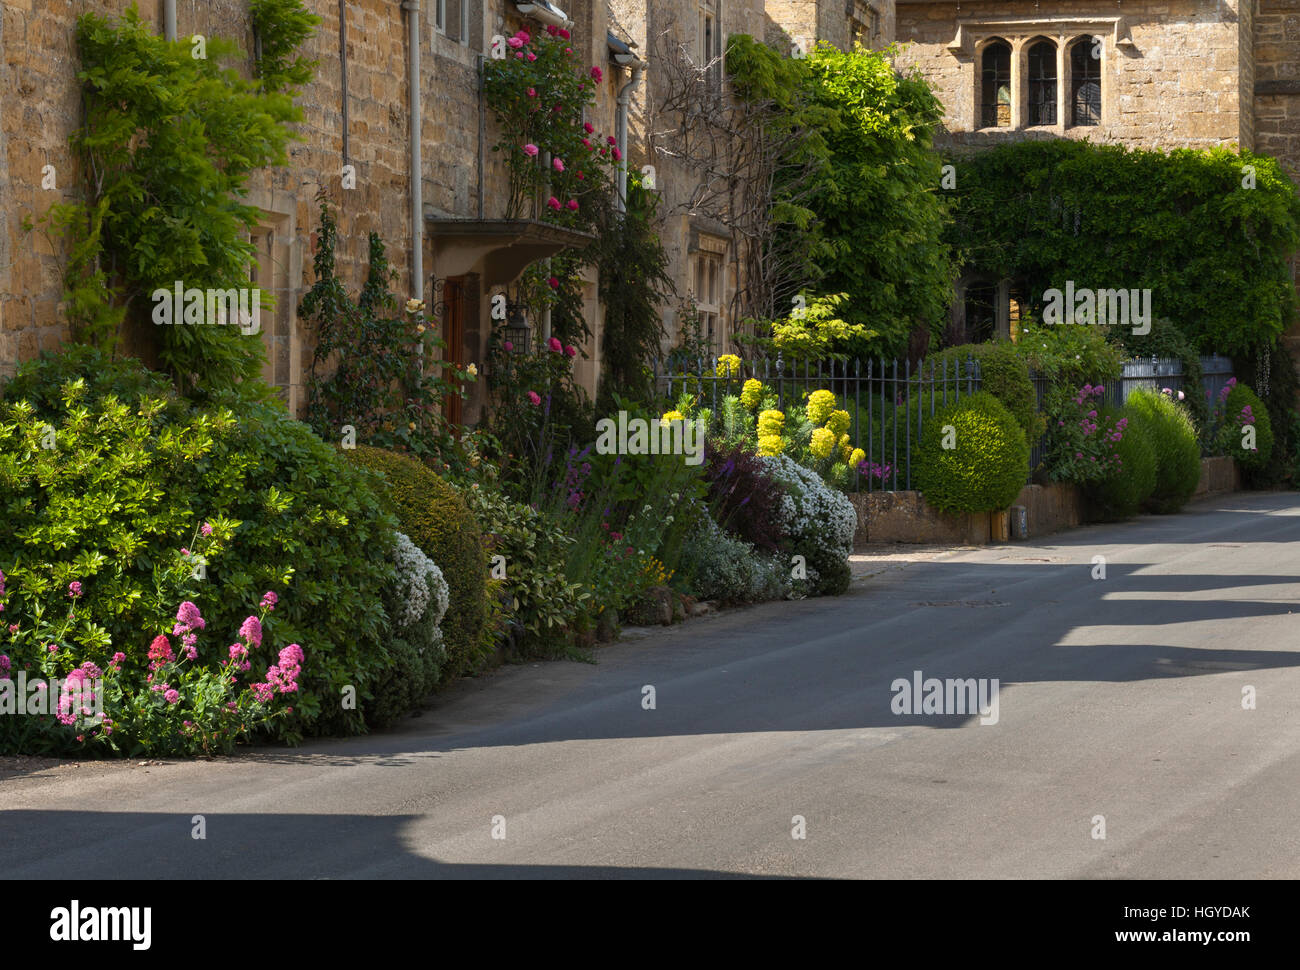 Cotswold stone cottages with colourful roadside floral borders in the village of Stanton, Cotswolds, Gloucestershire, England Stock Photo